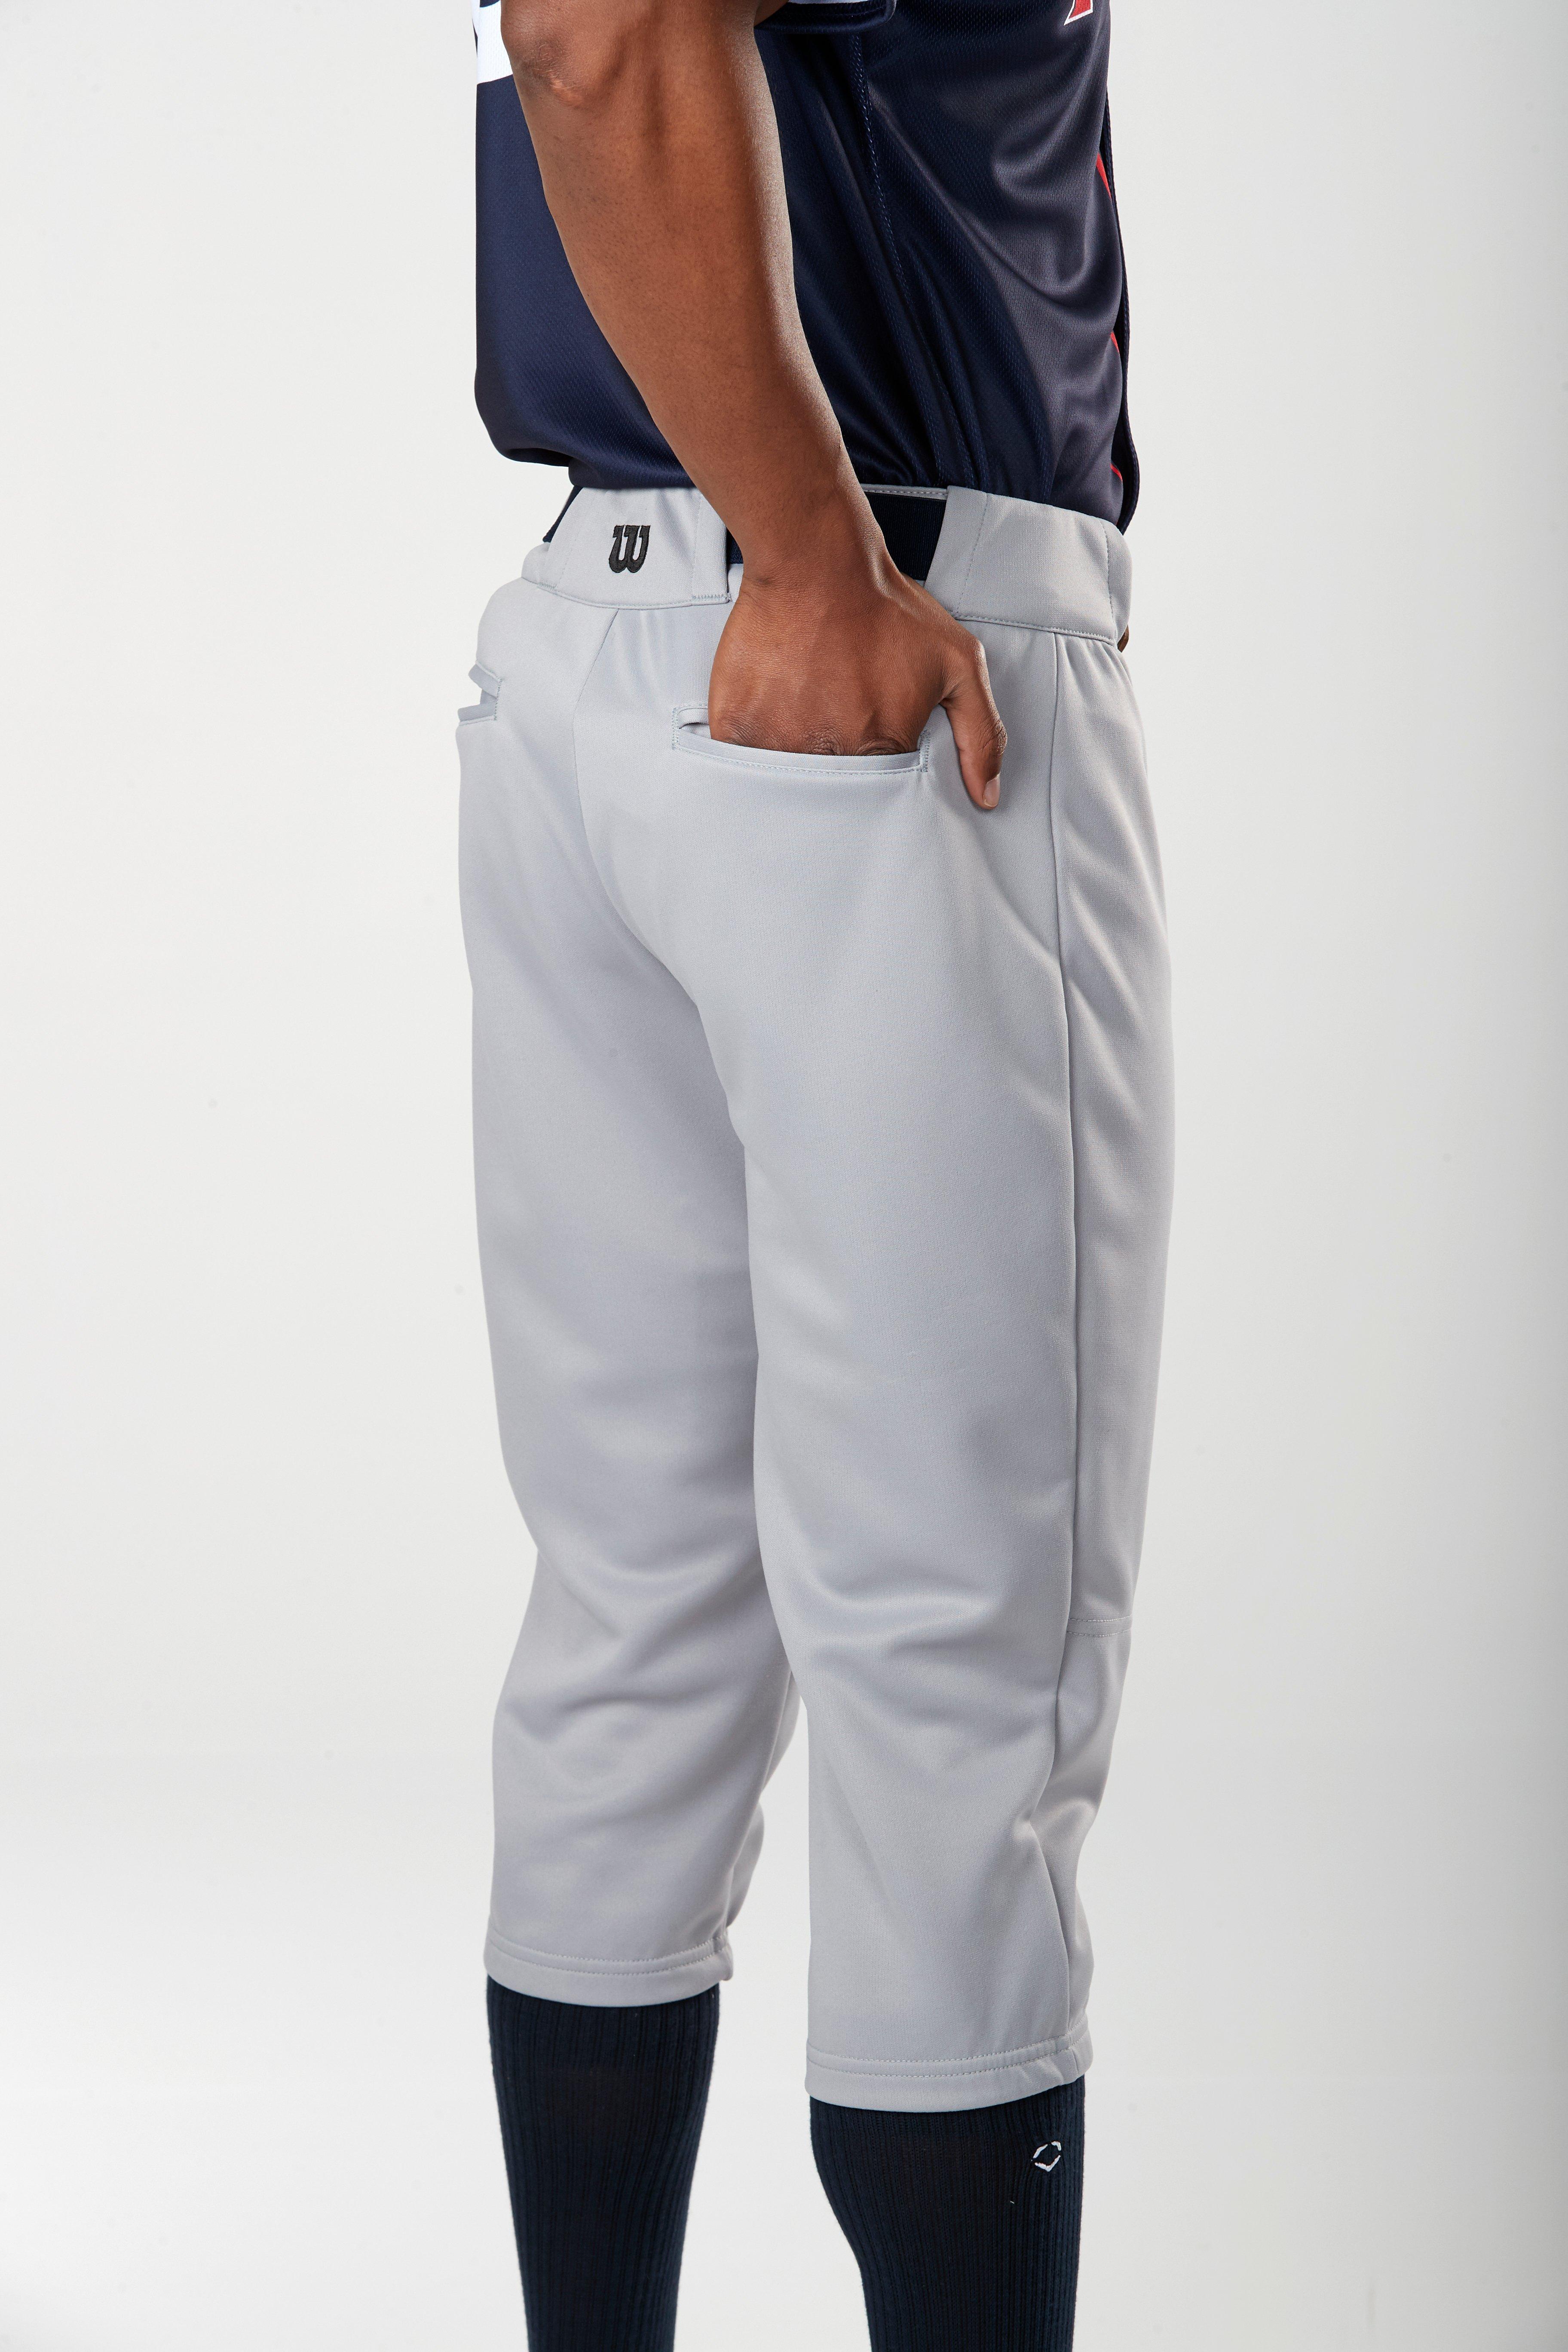 Youth Launch Knicker Baseball Pant - Casual Adventure